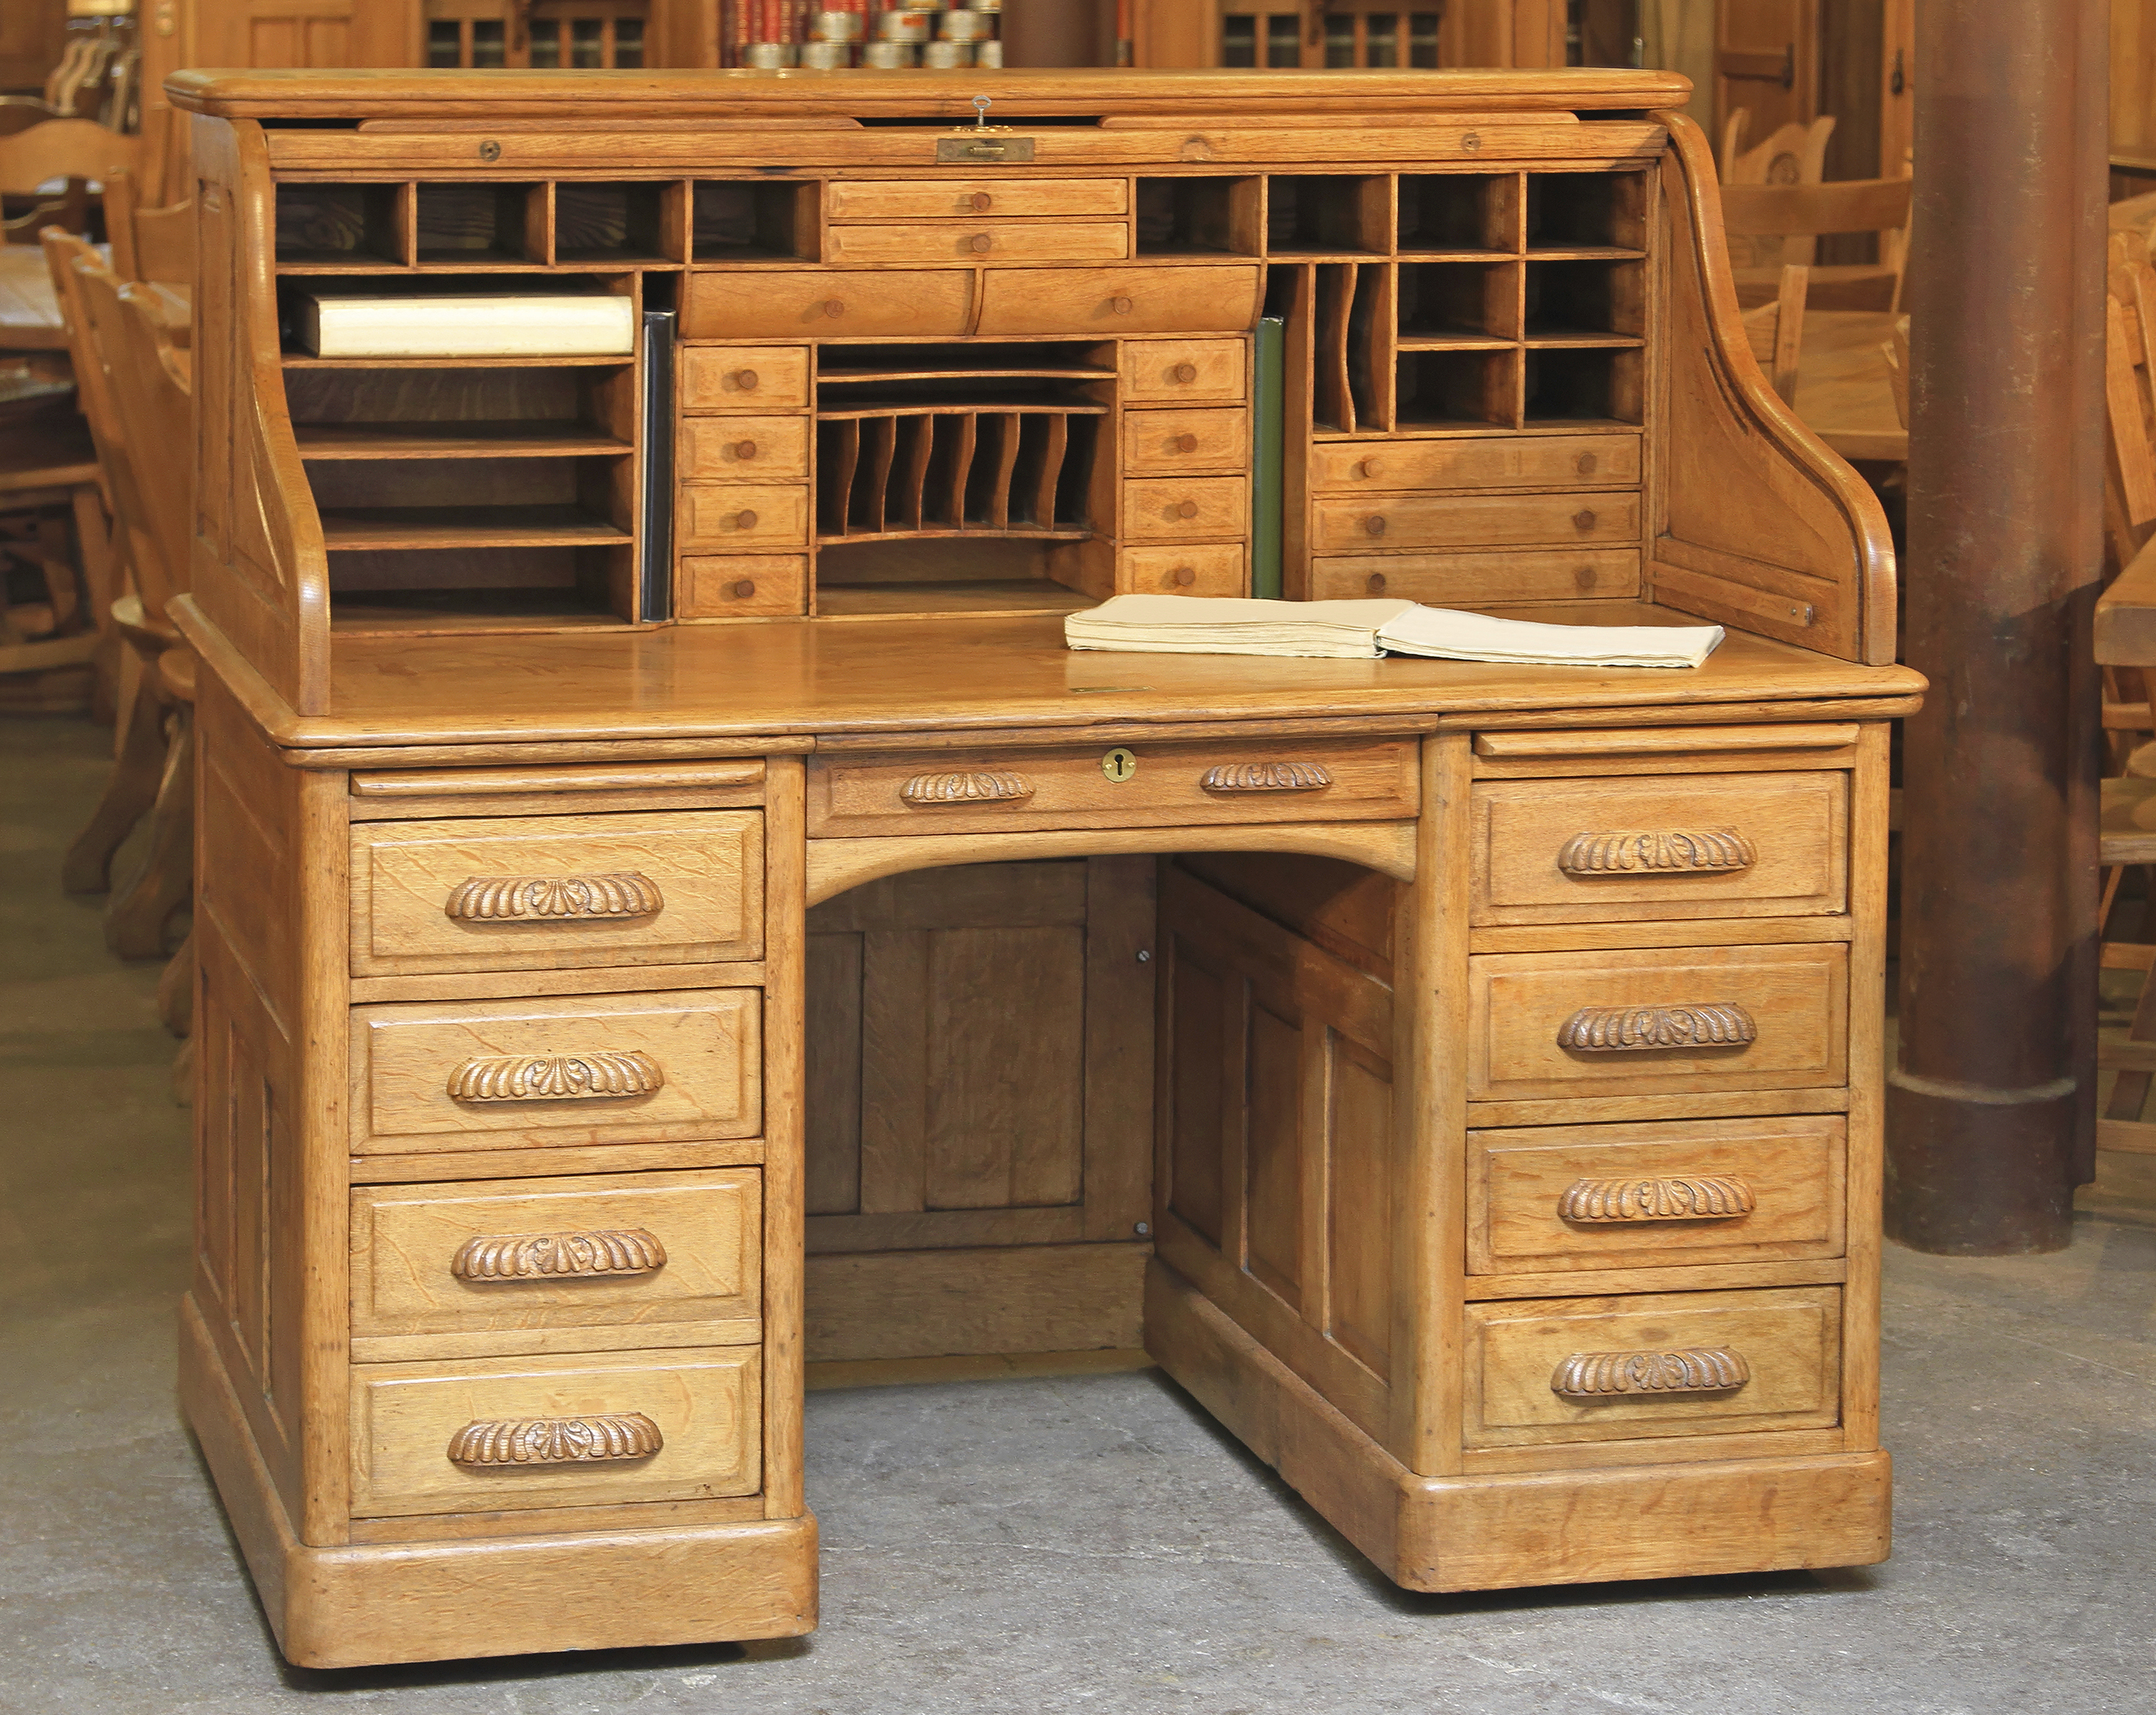 How to Determine the Age of an Antique Roll-Top Desk